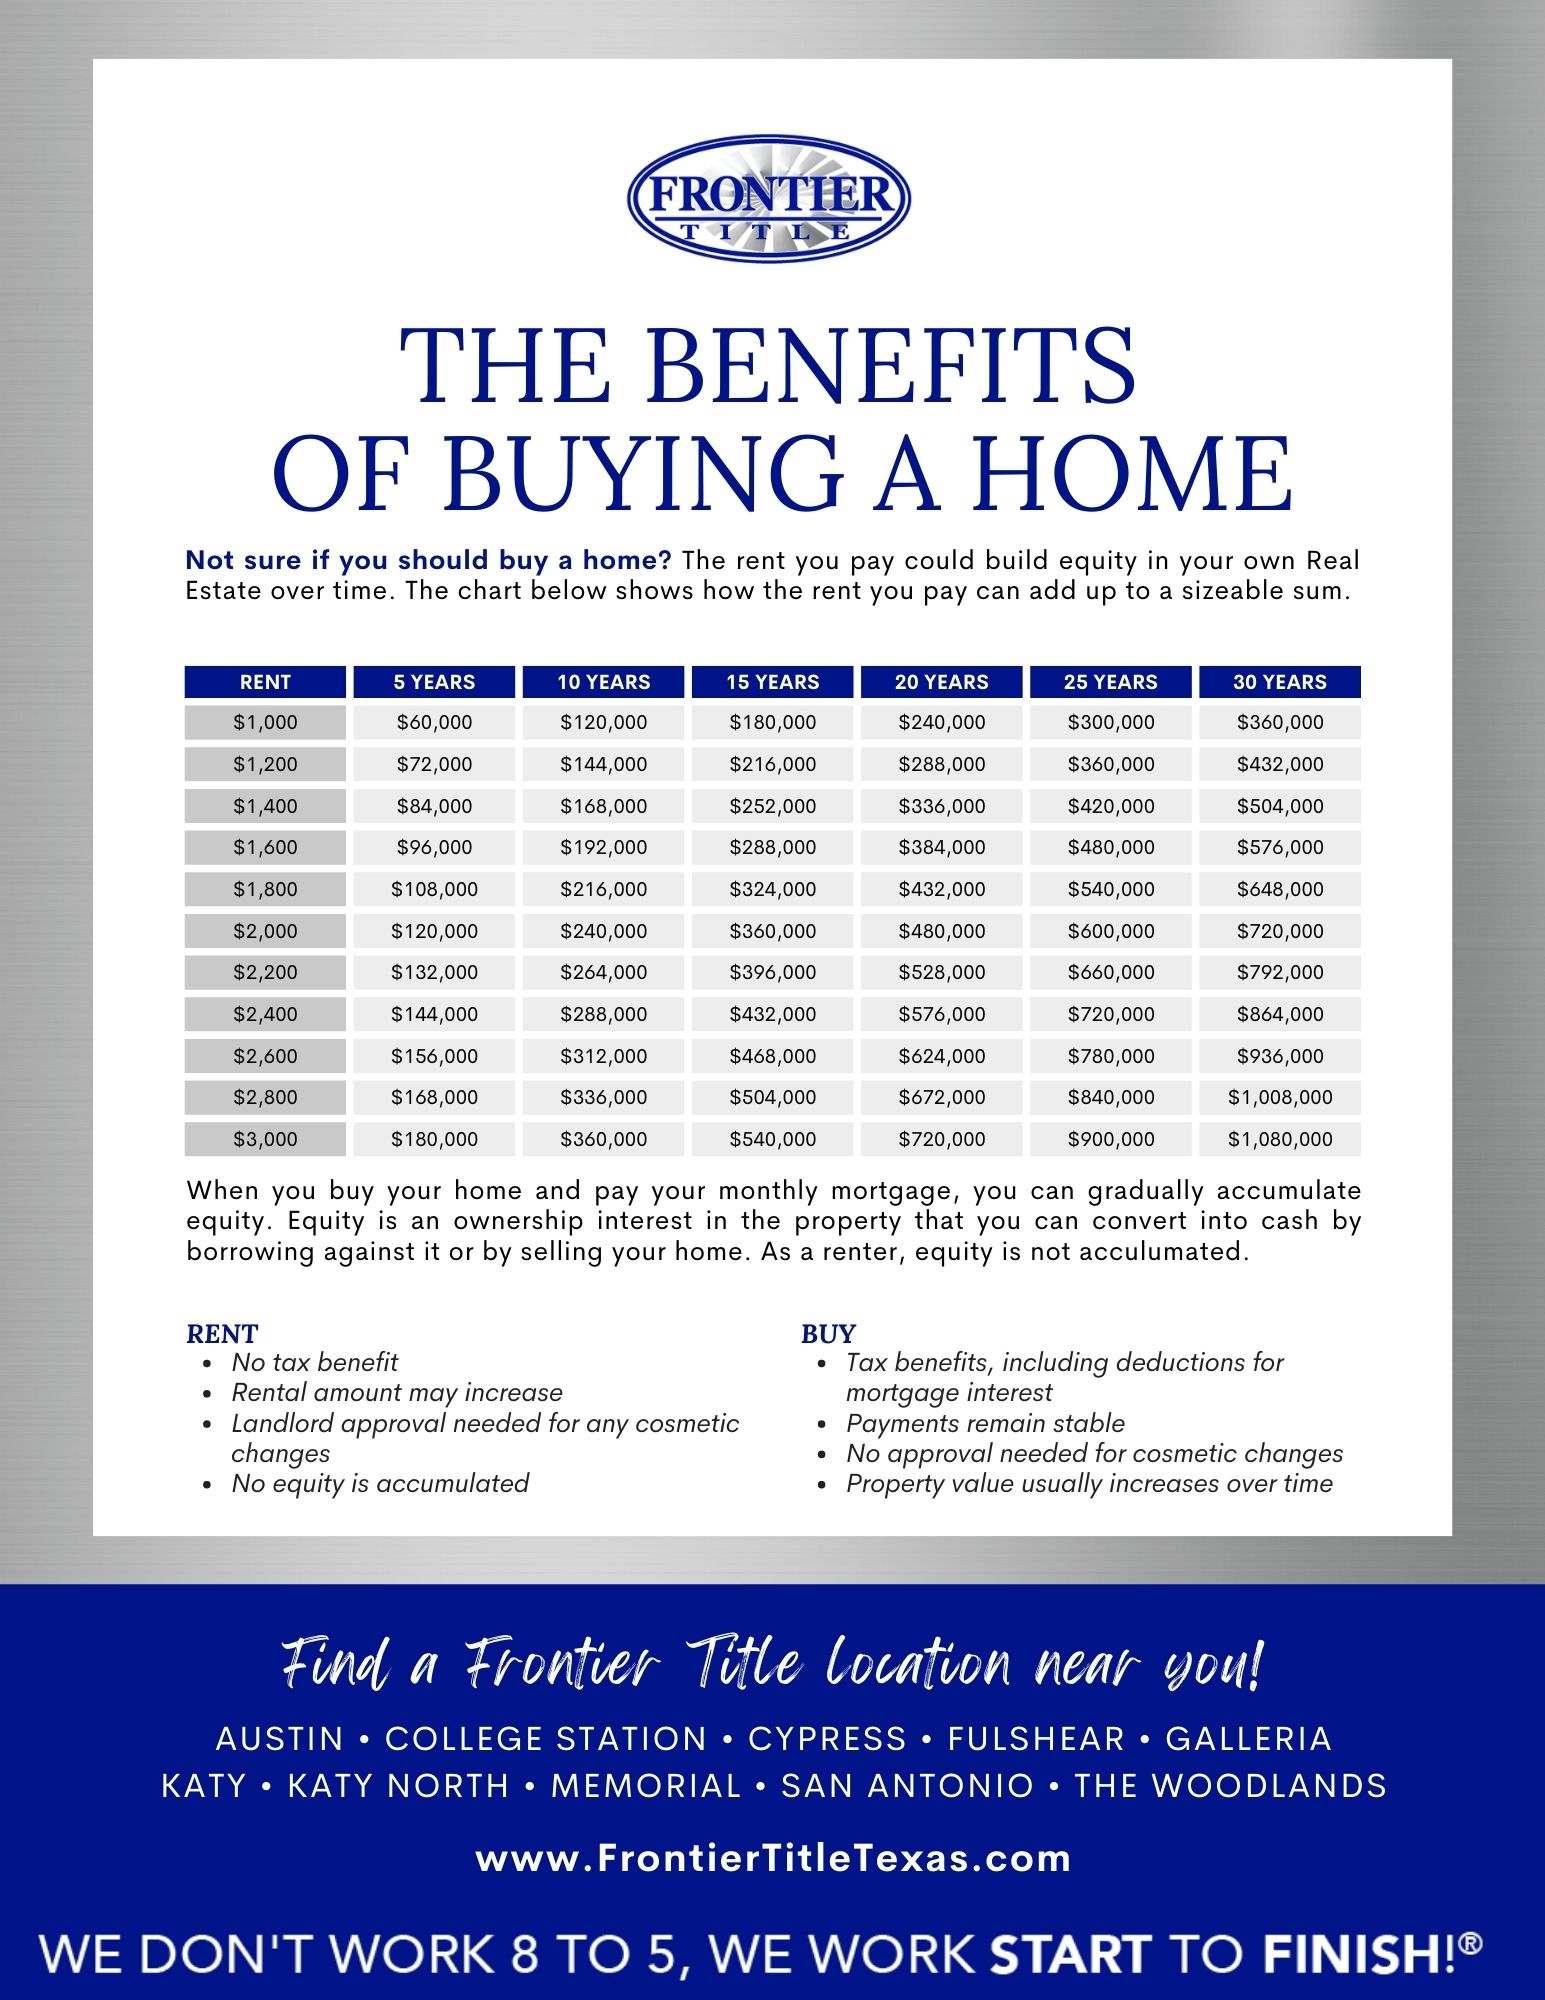 Frontier Title - Benefits of Buying a Home